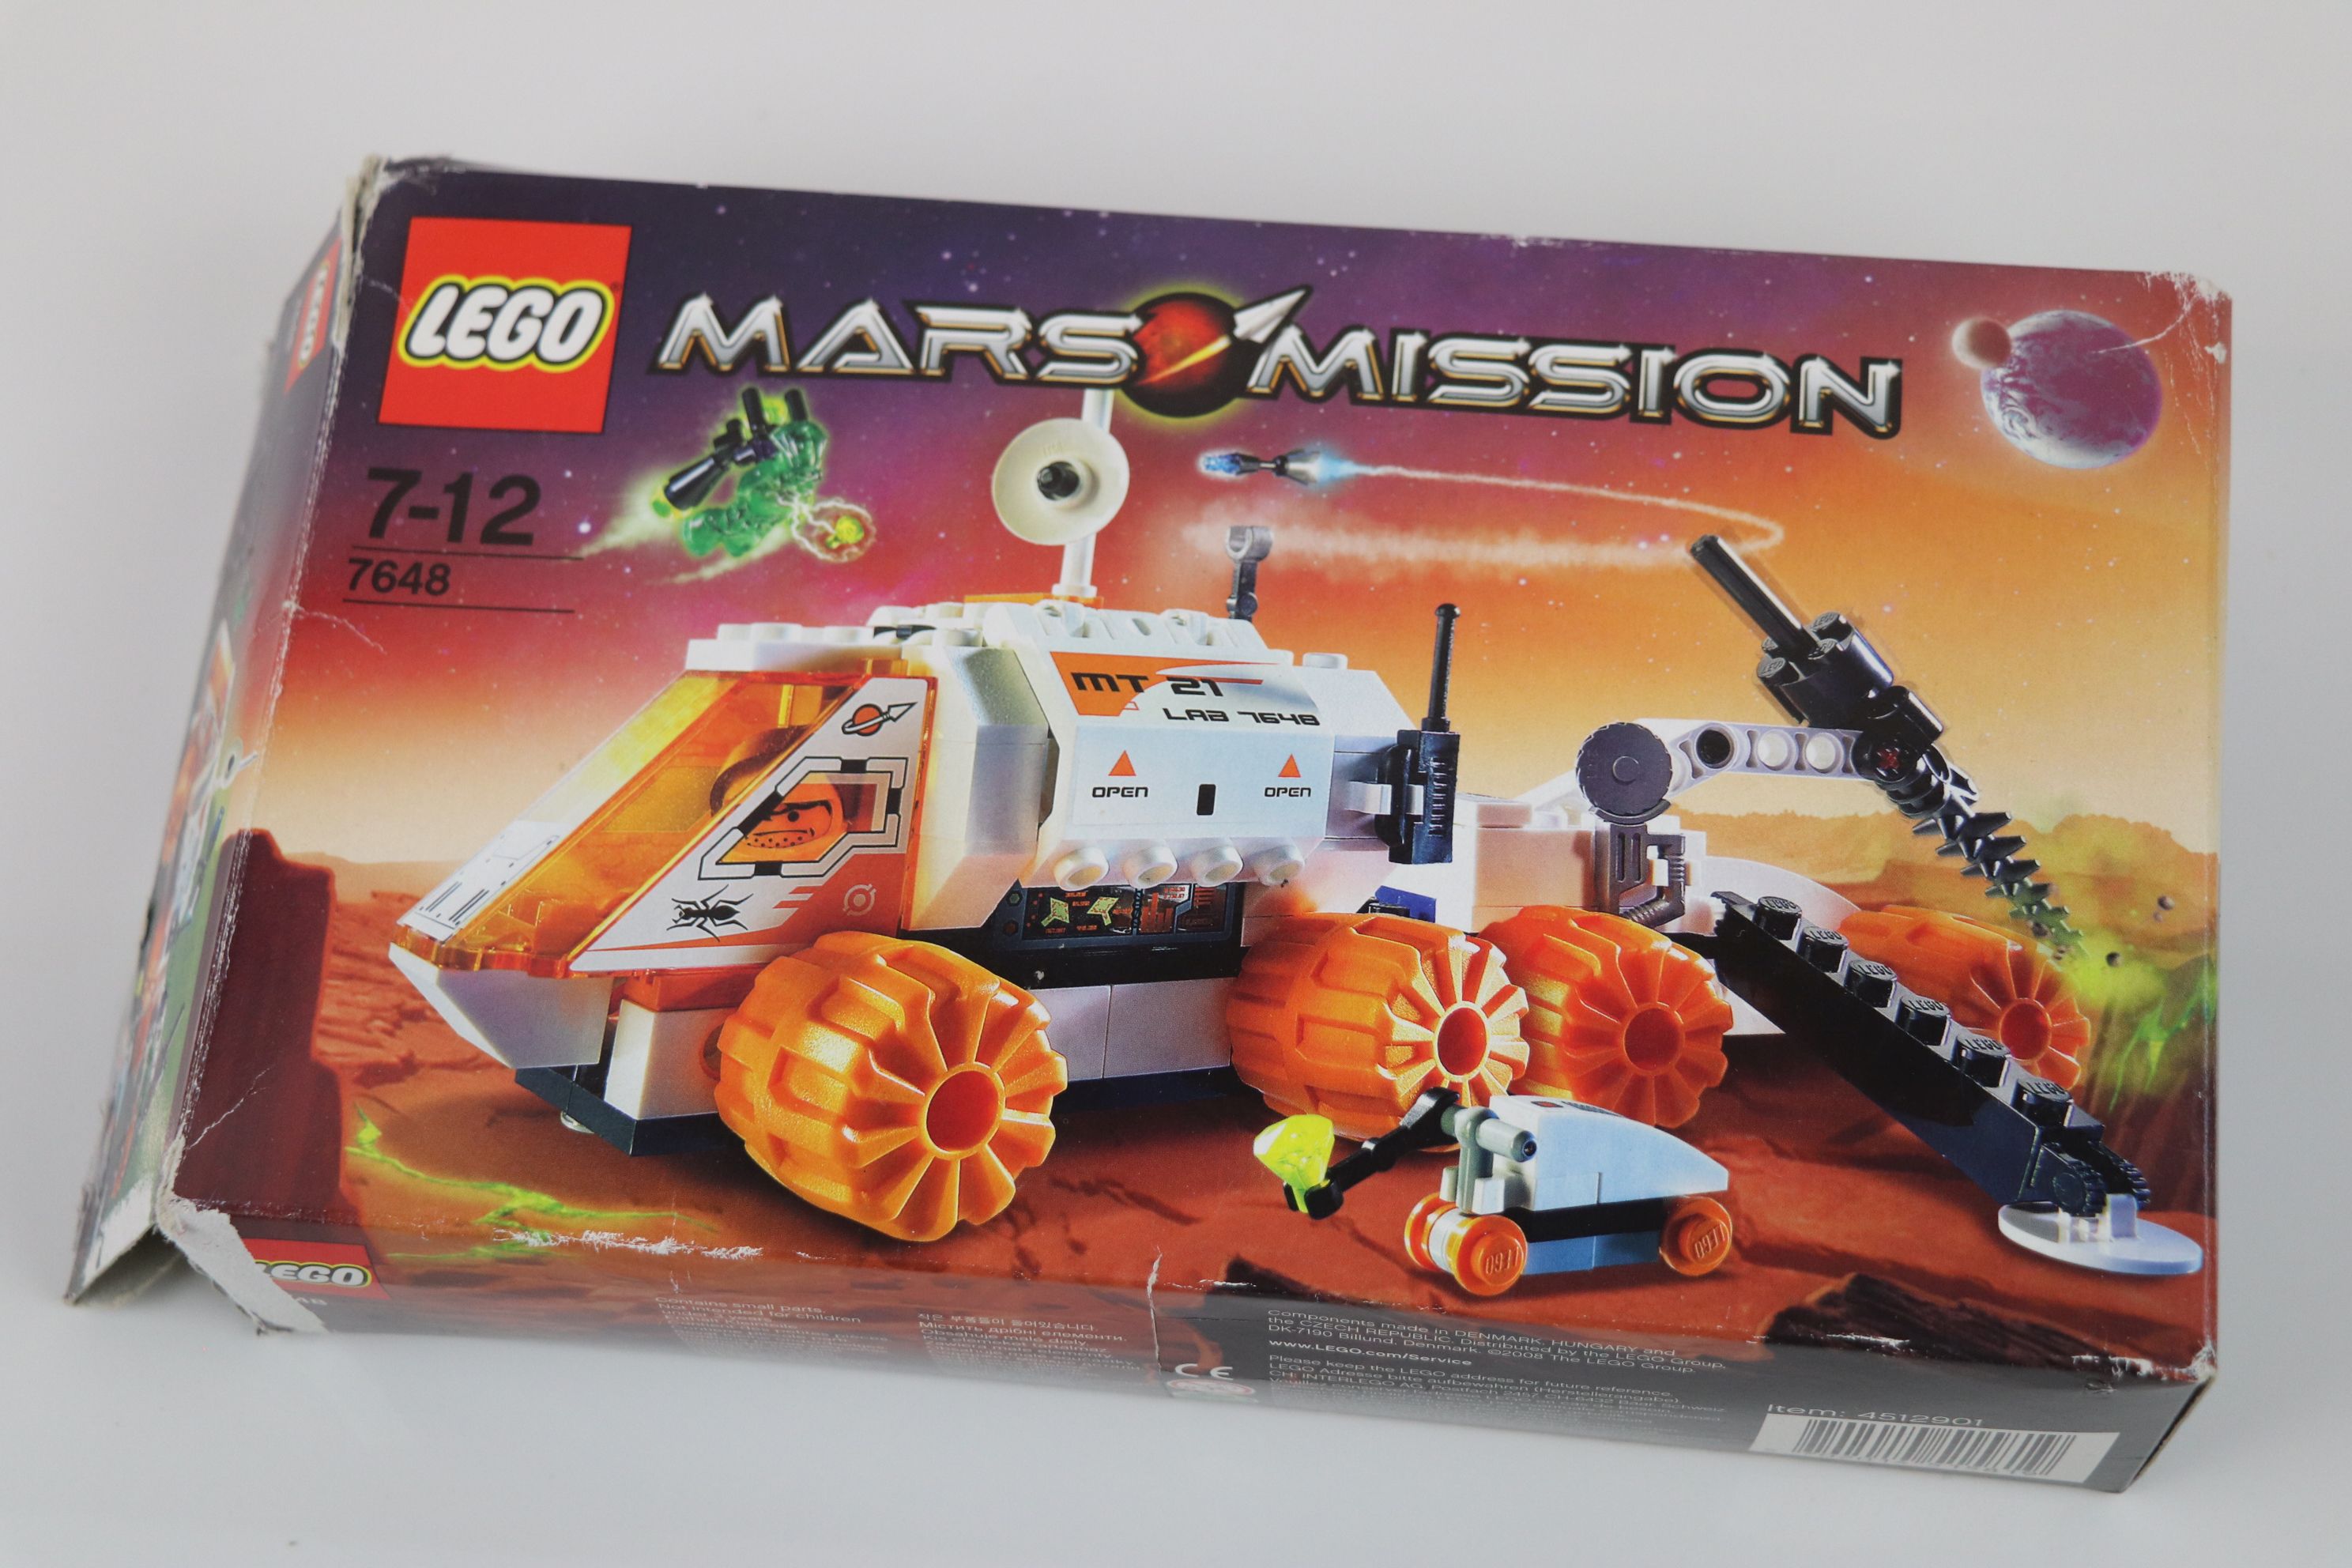 Six boxed Lego Mars Mission sets to include 7693, 7646, 7697, 7648, 7695 & 7694, plus an unboxed - Image 8 of 10